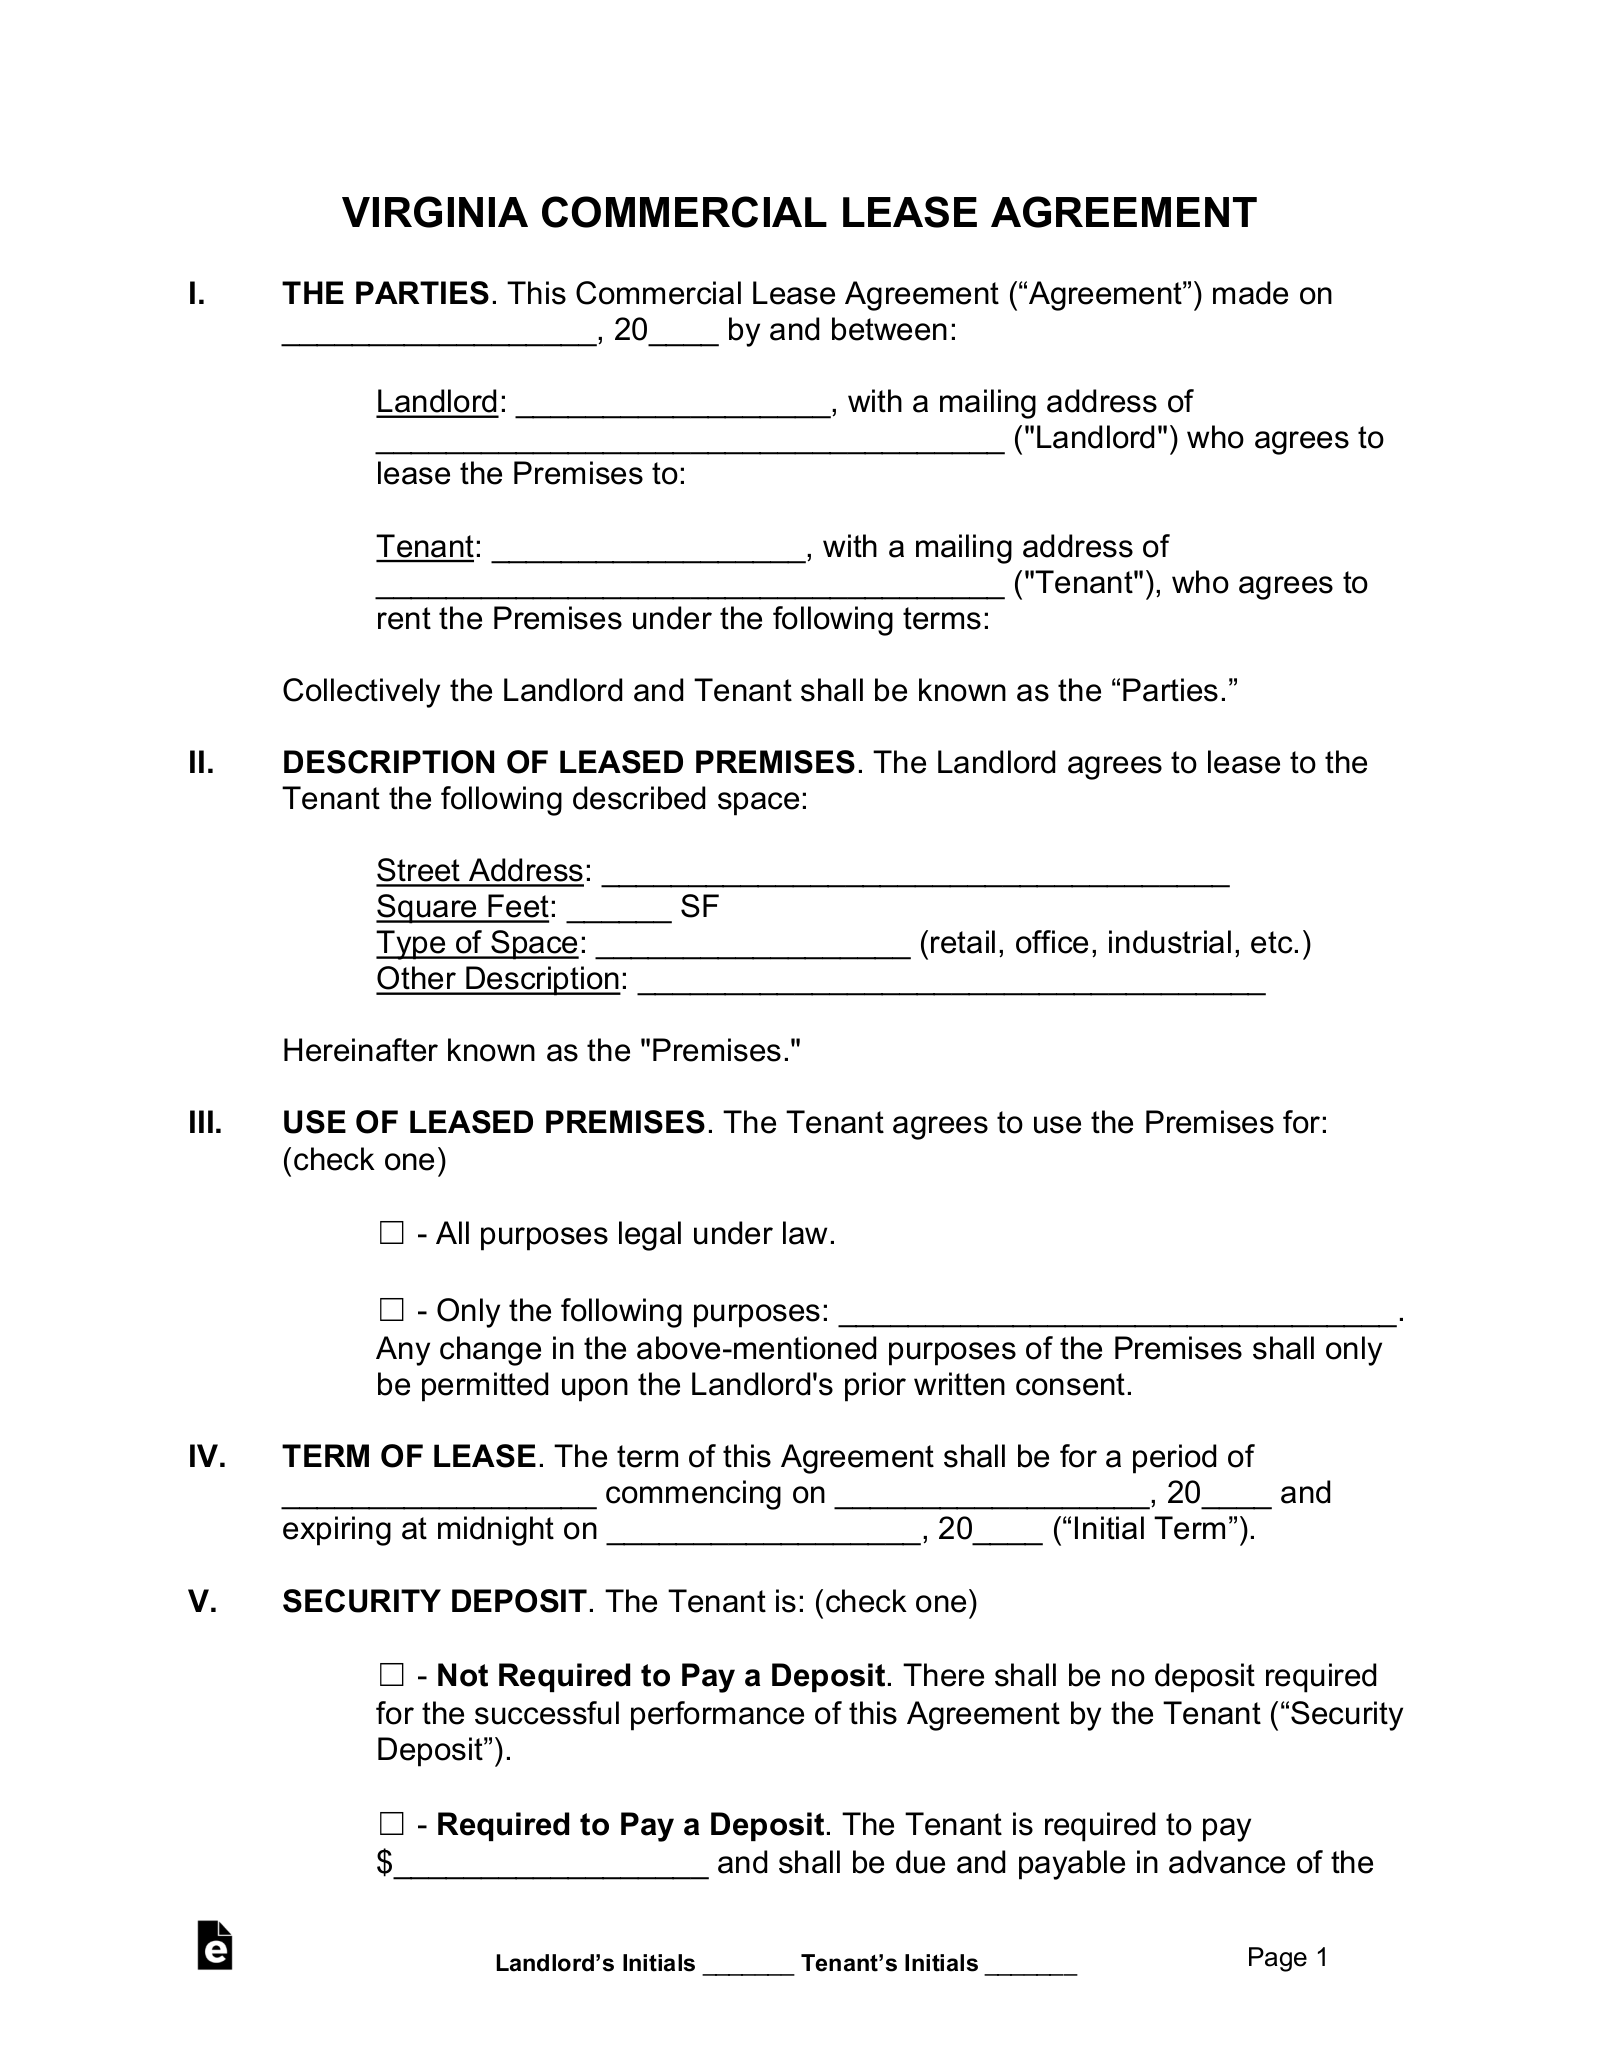 Virginia Commercial Lease Agreement Template